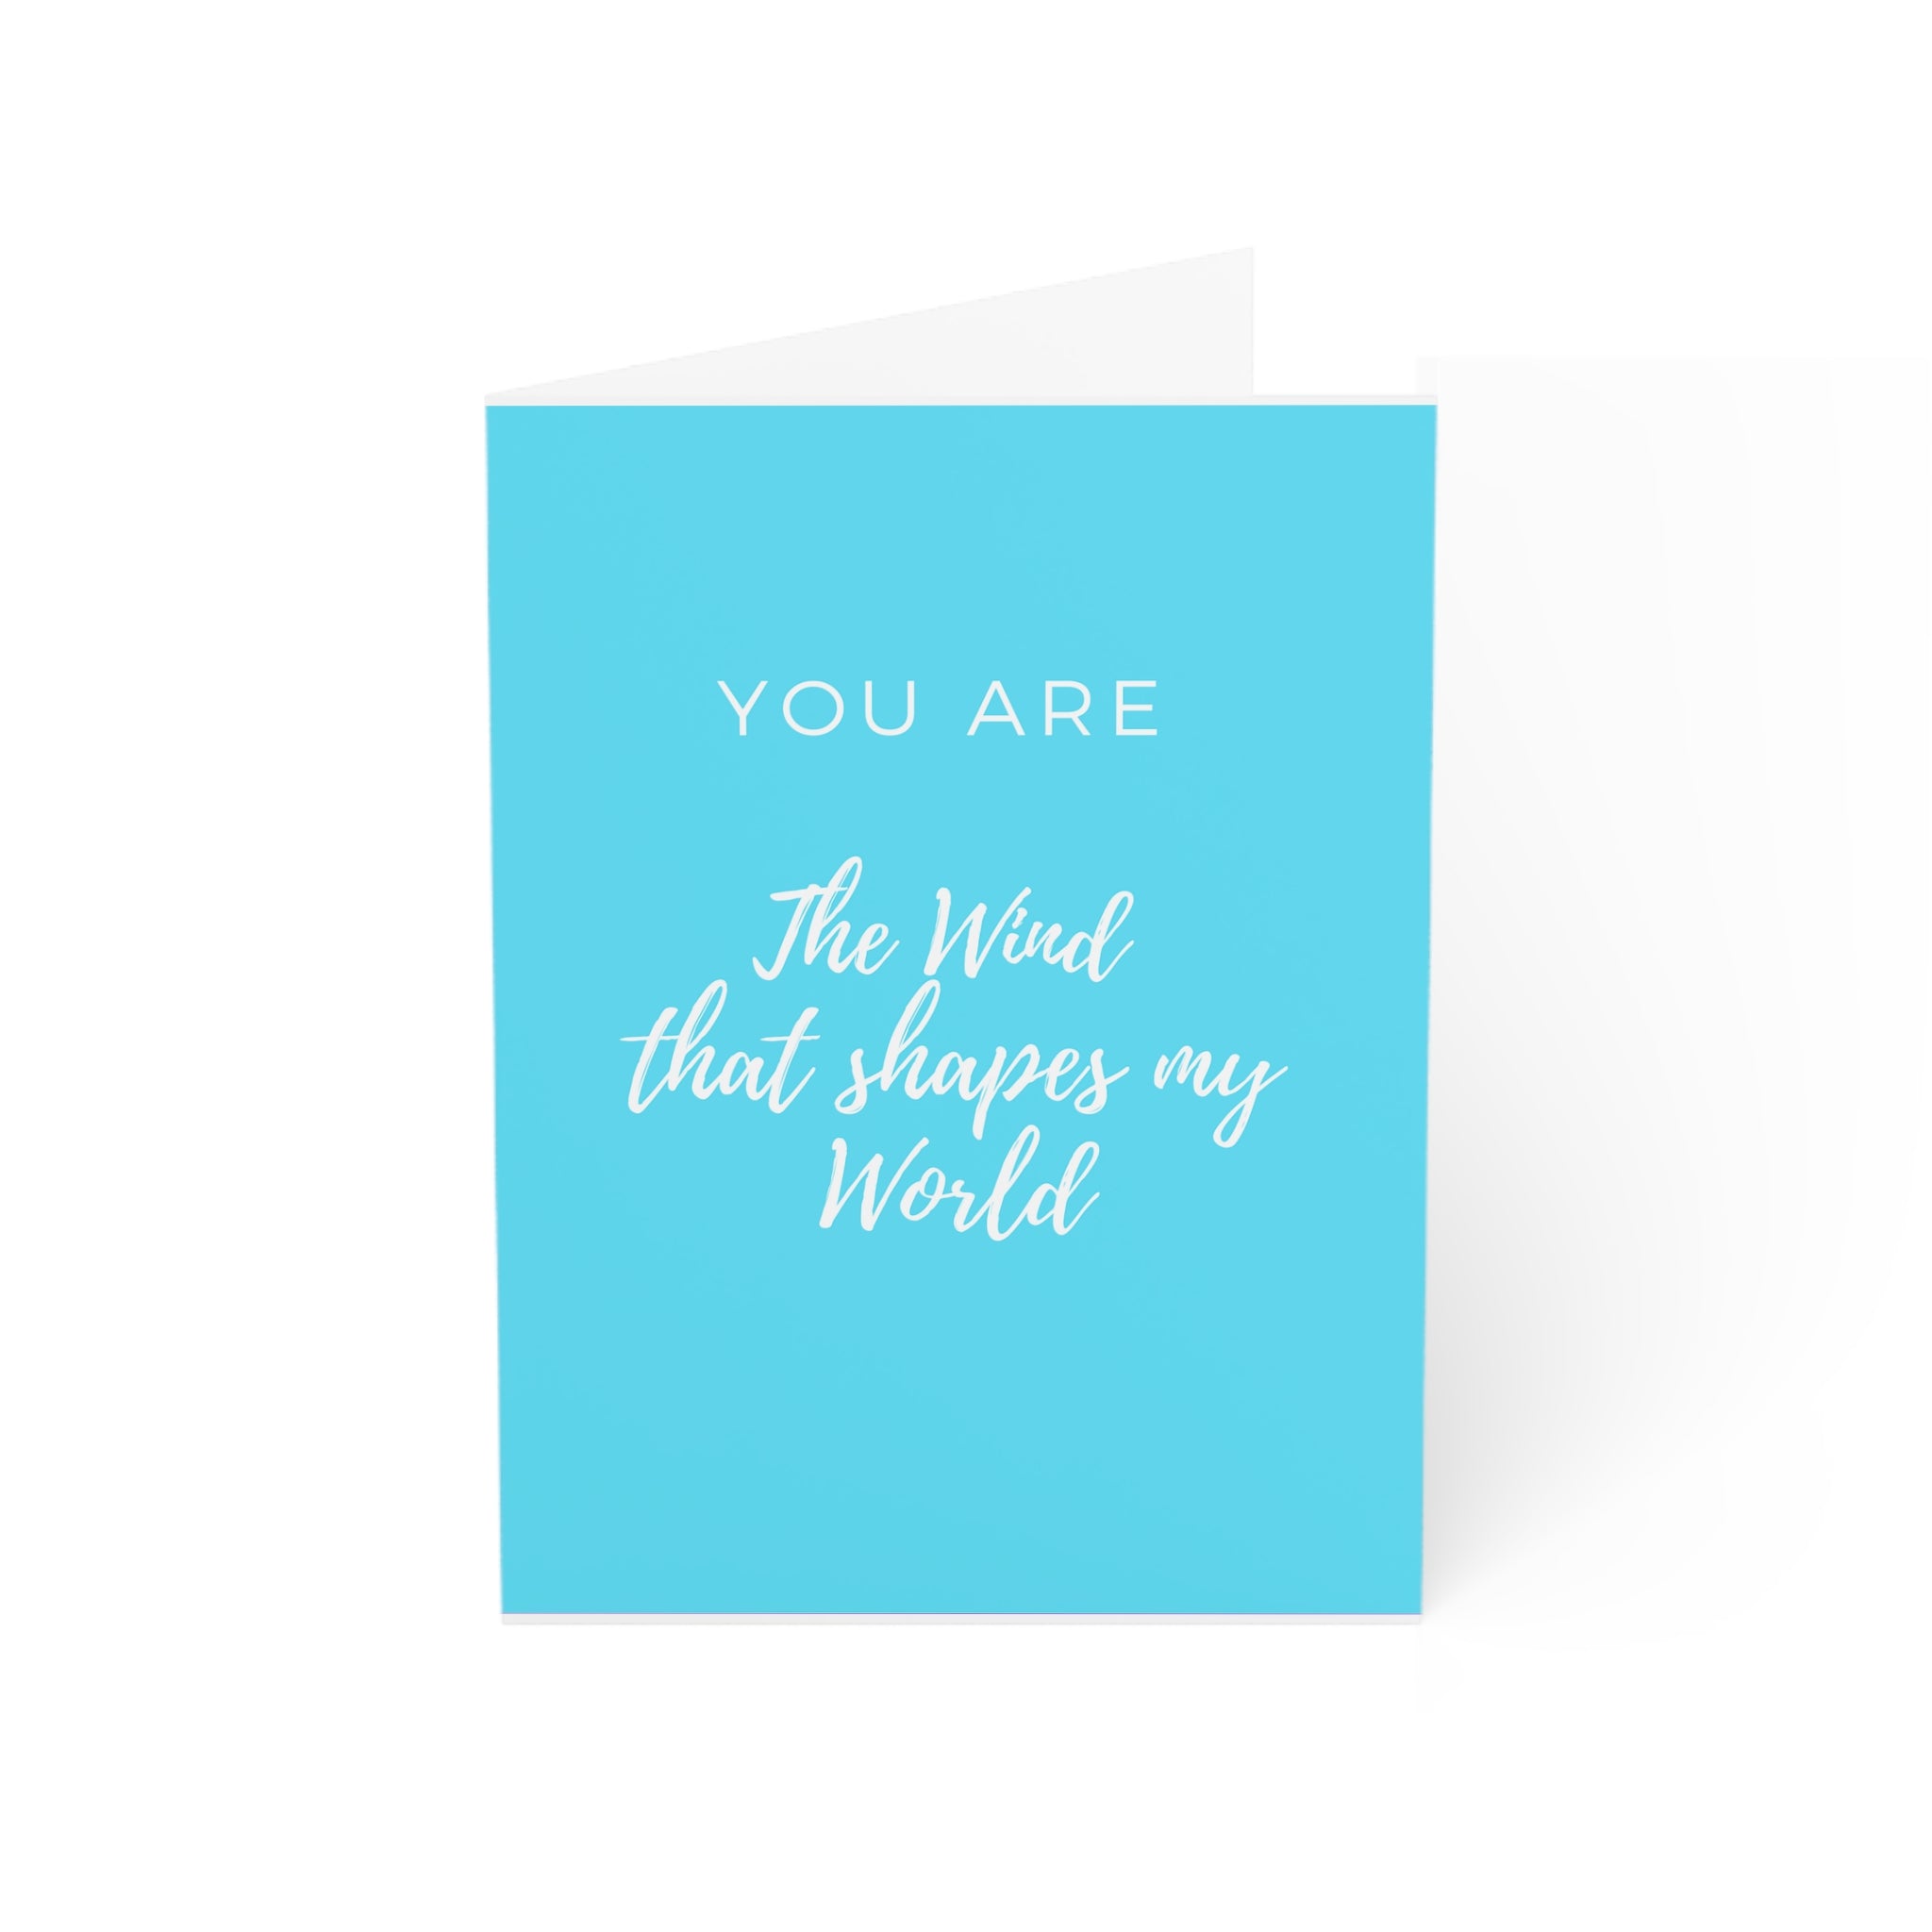 Greeting Cards (Light Blue Cover)  You are the wind that shapes my world